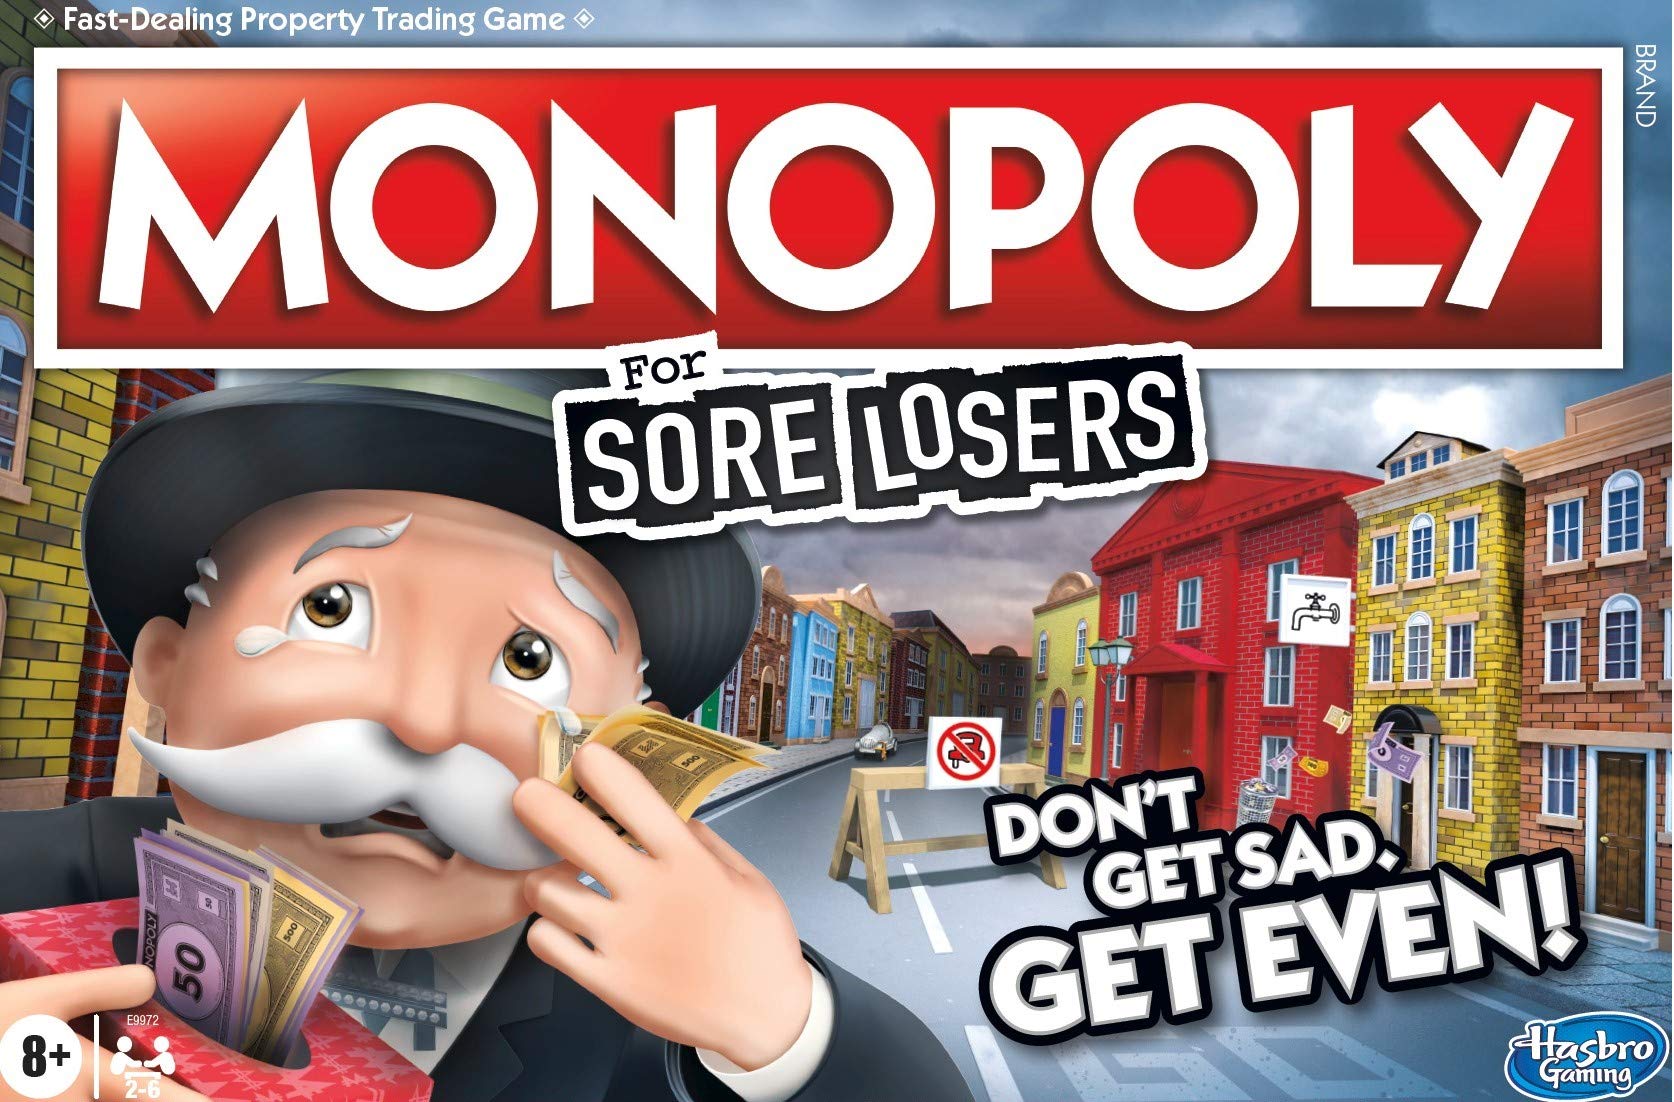 ‘Monopoly Kansas City’ is available for the holidays